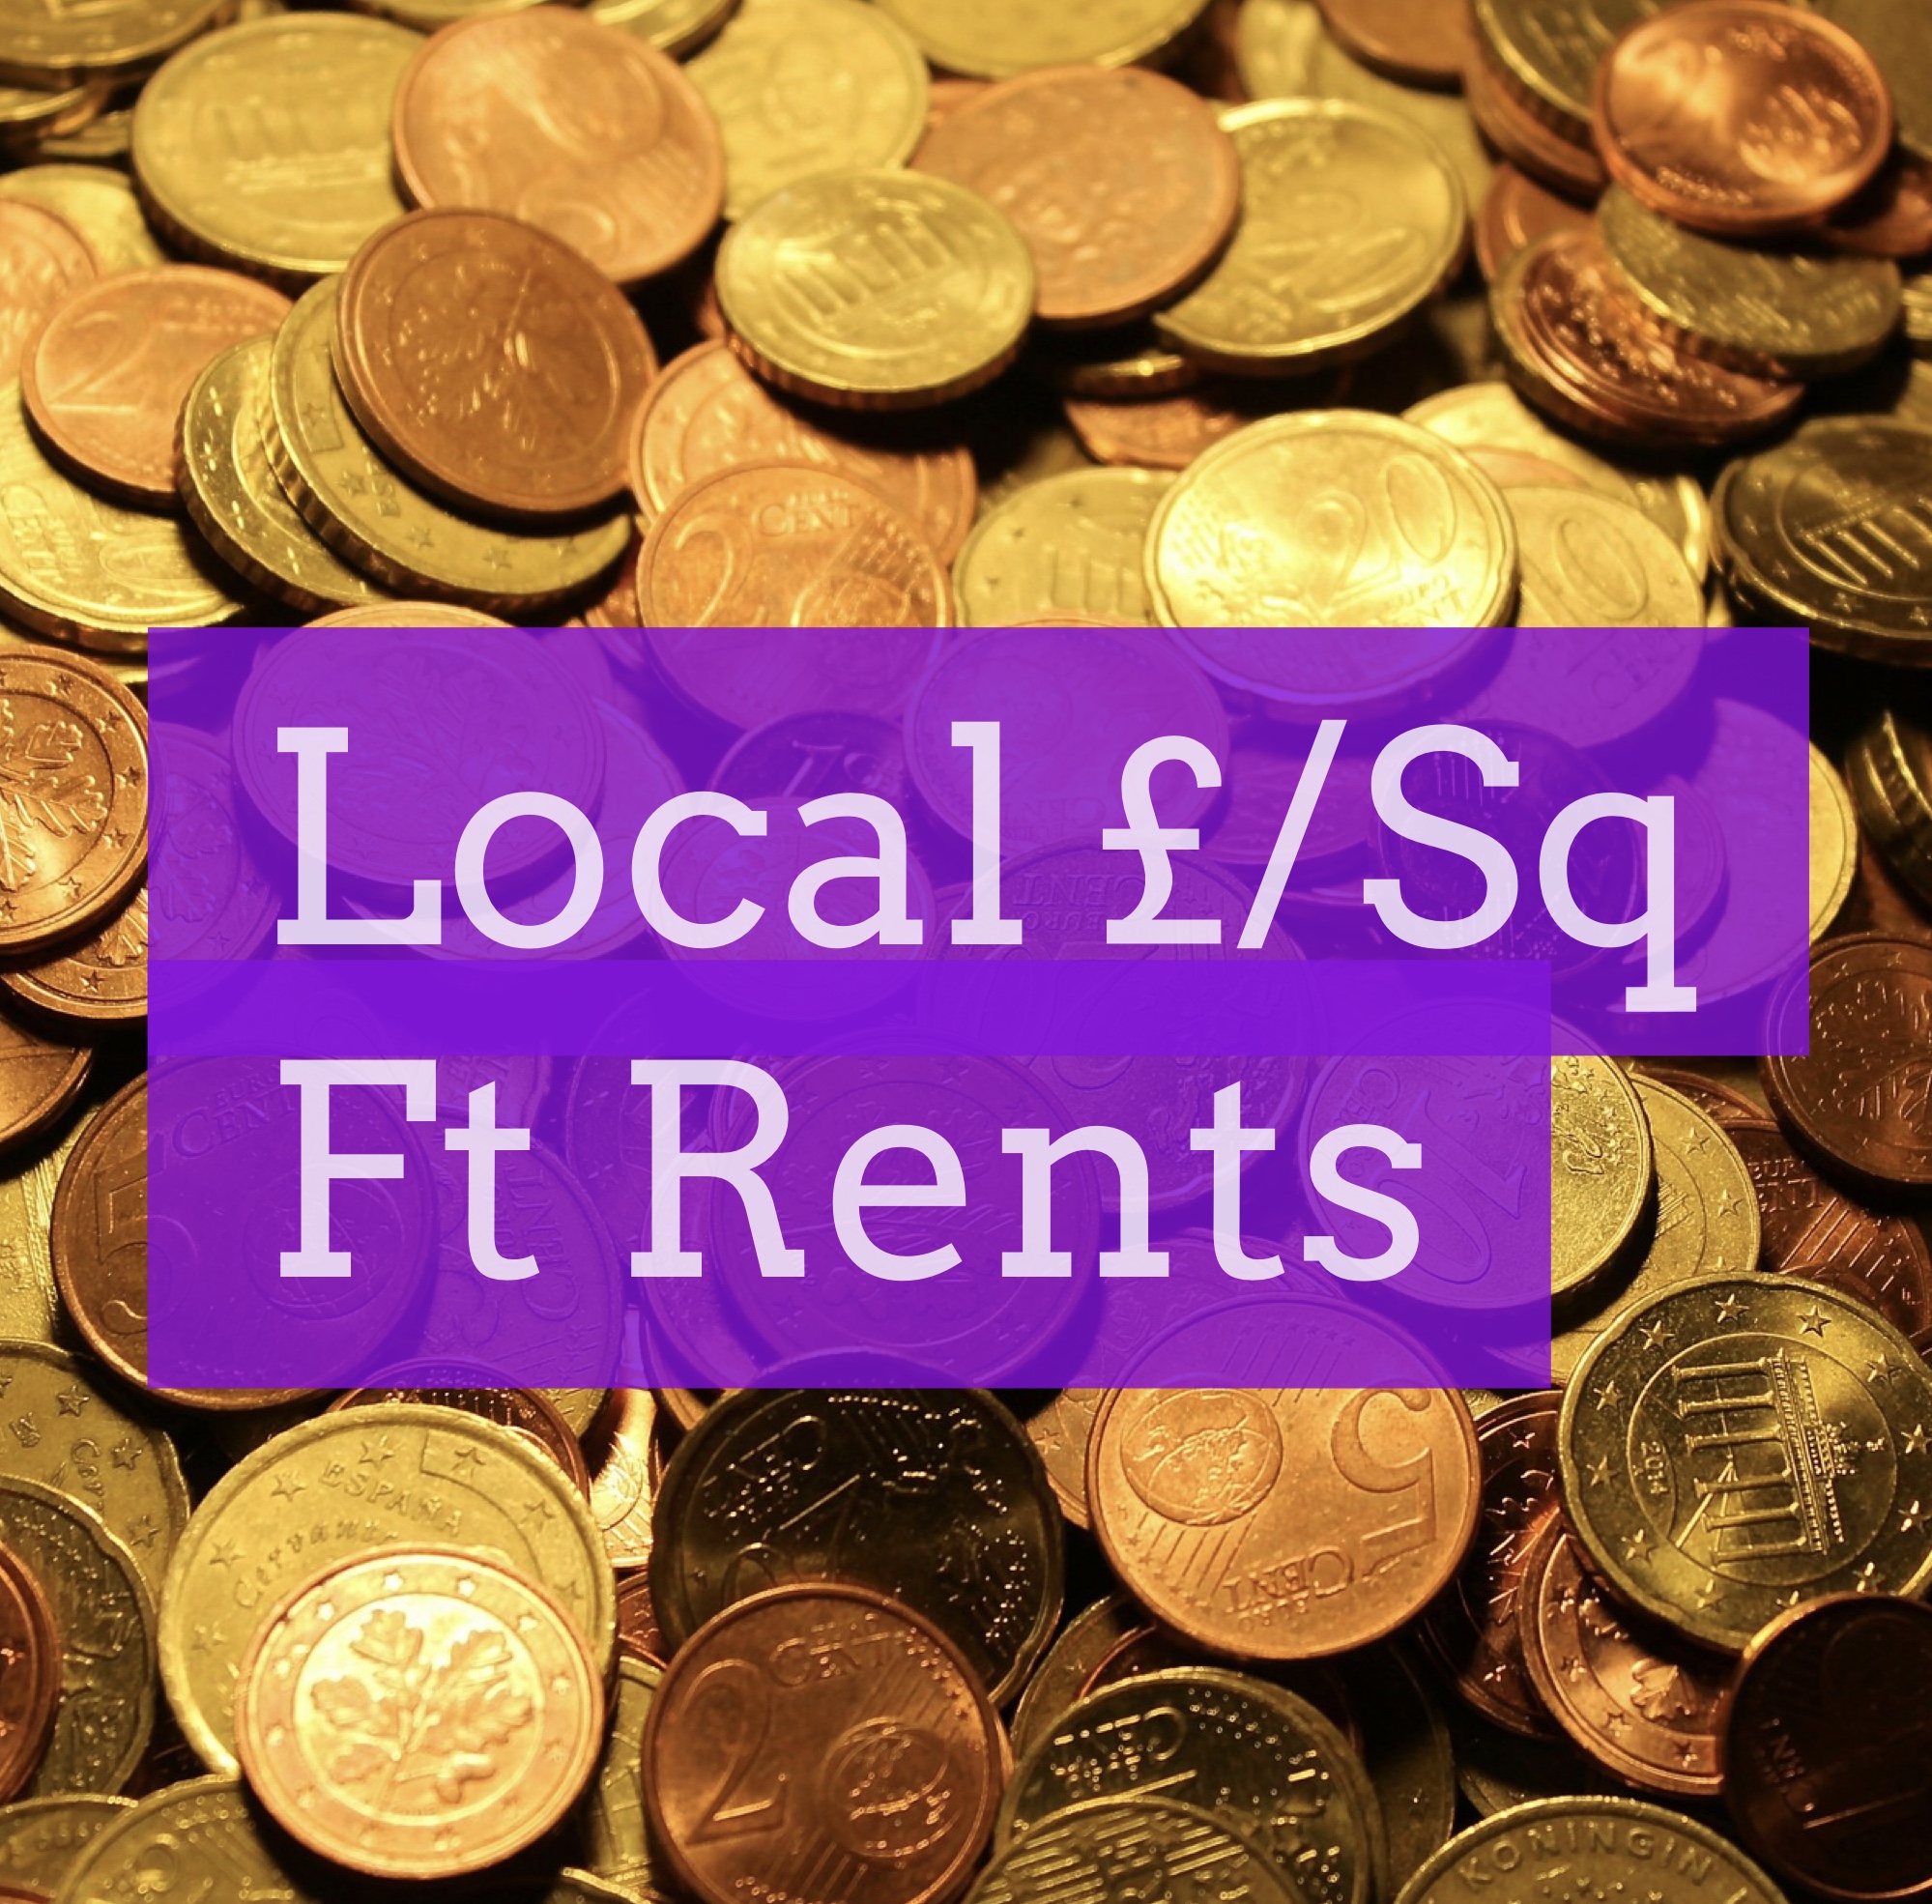 Sidcup Private Rents Hit 